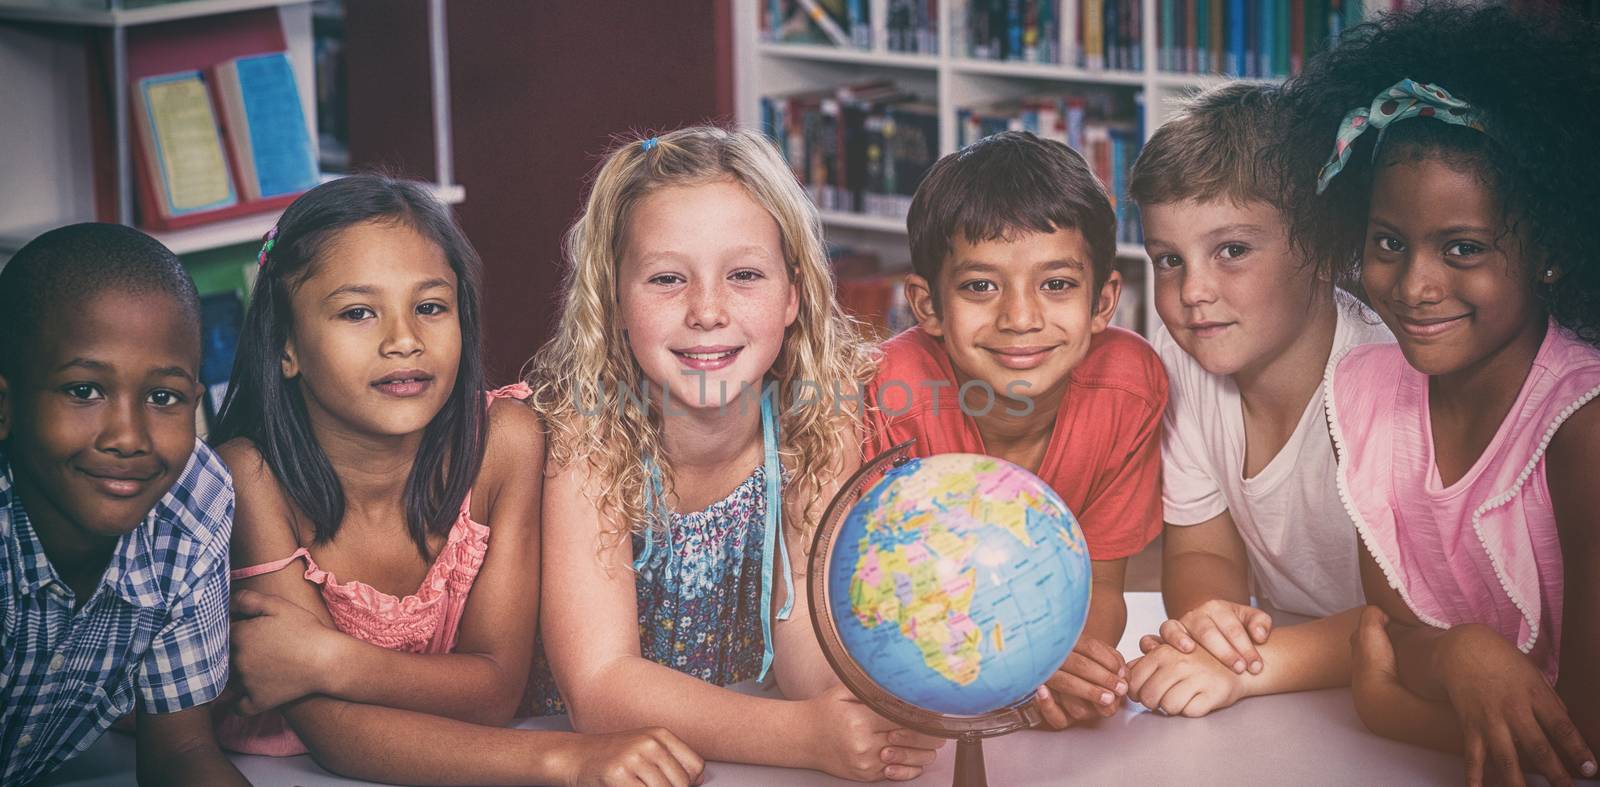 Portrait of smiling children with globe on table in library 